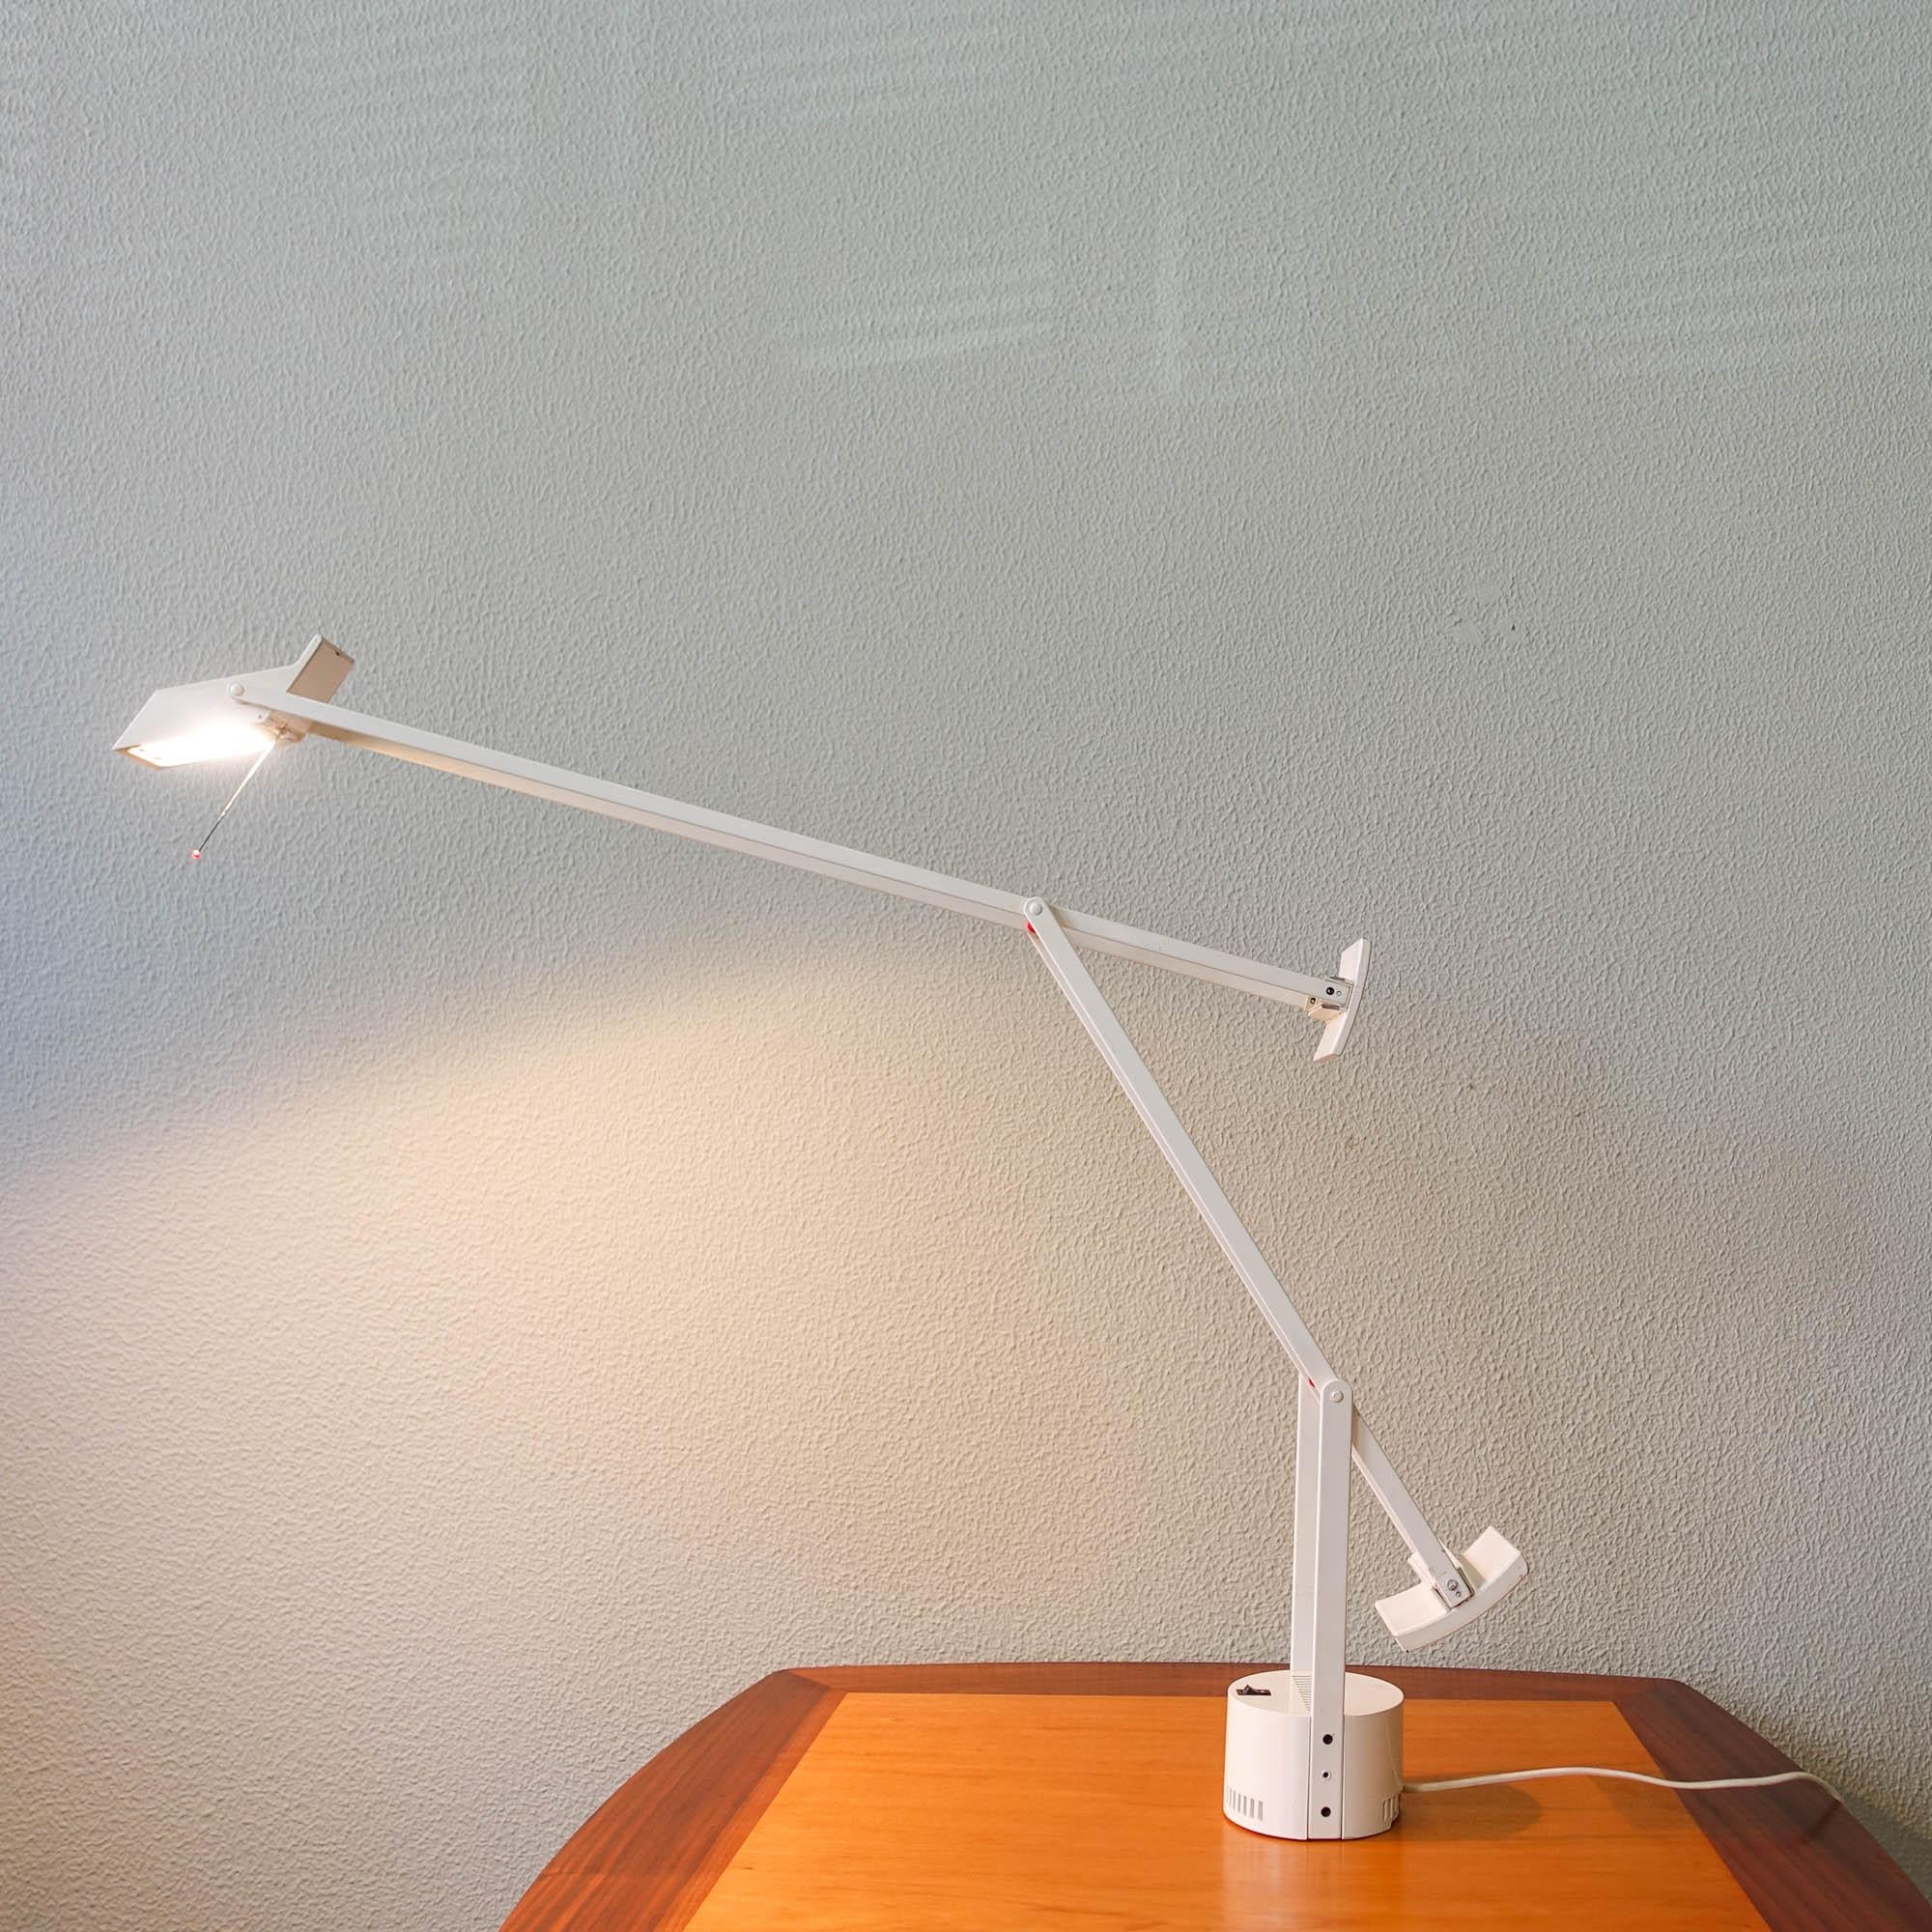 Late 20th Century Richard Sapper ‘Tizio’ Table Lamp for  Artemide, Italy, 1972 For Sale